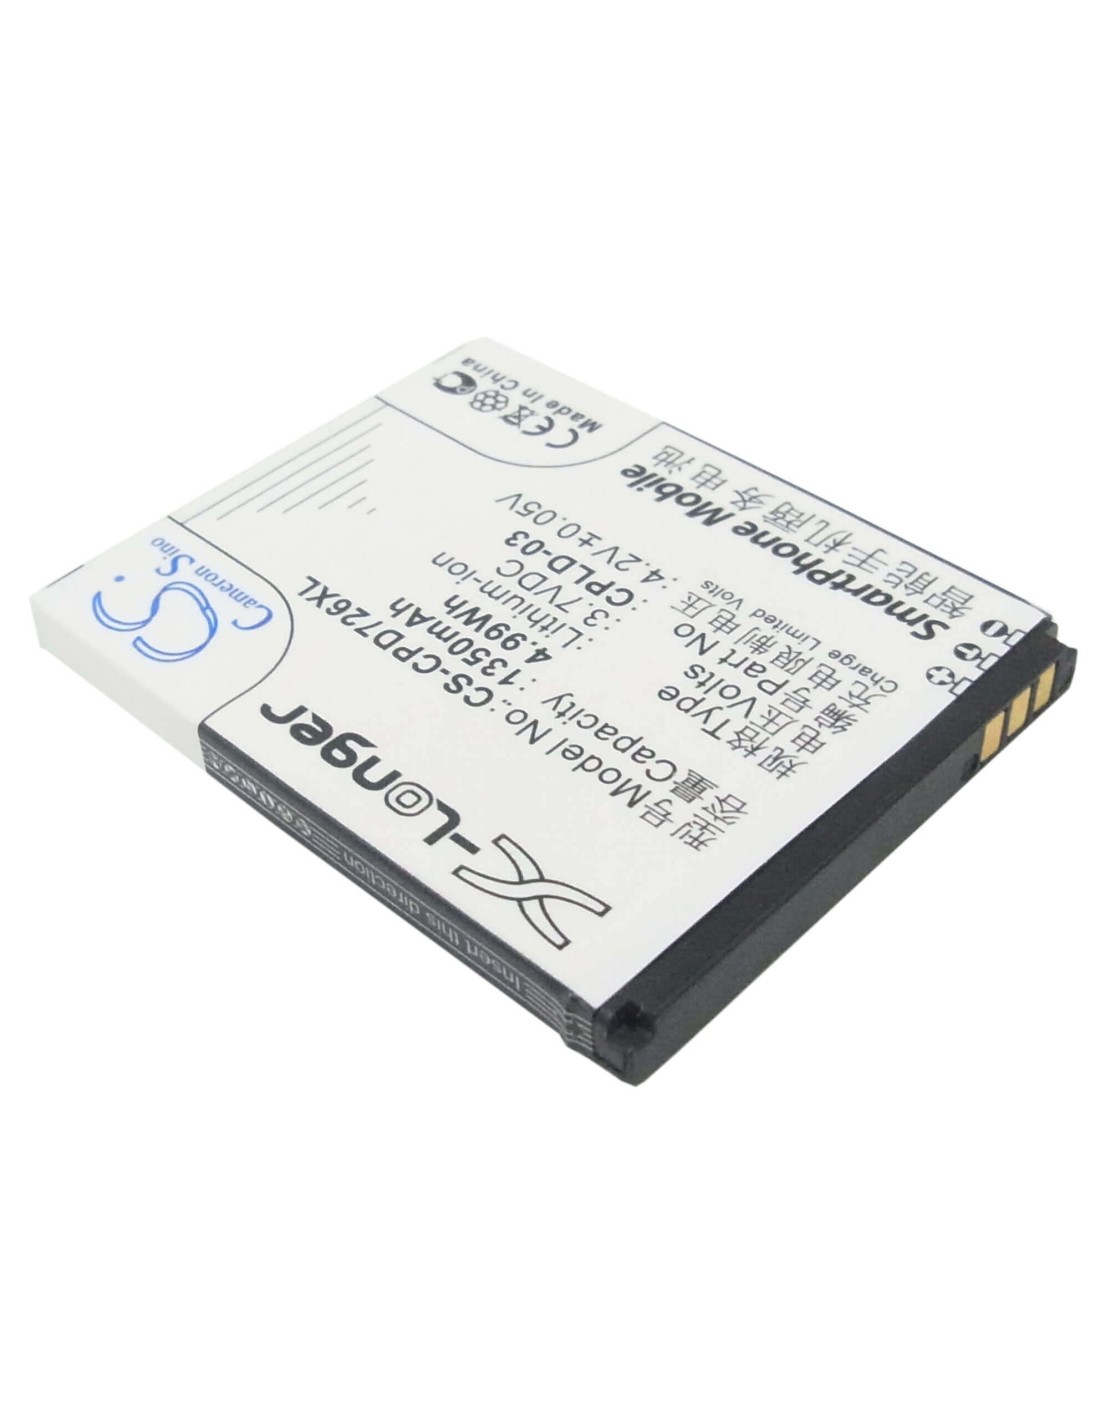 Battery for Coolpad 7266 3.7V, 1350mAh - 5.00Wh